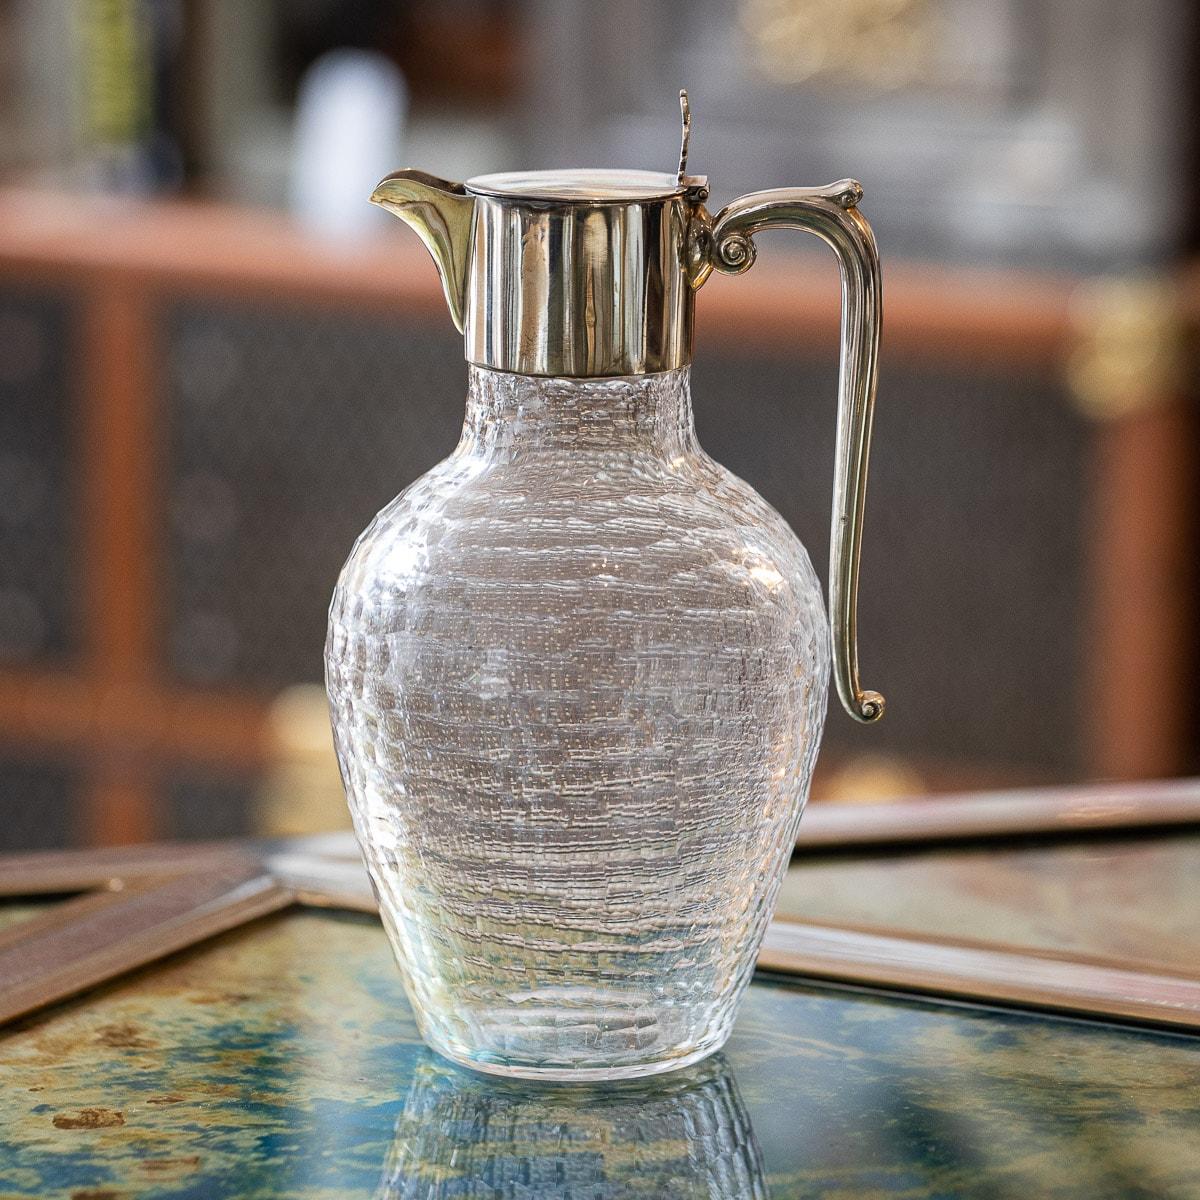 19th Century Victorian silver & cut glass wine jug, the baluster body beautifully hand engraved imitating a hand hammered effect, the plain solid silver collar mounted with a hinged lid, elaborate thumb-piece and an elegant plain scroll